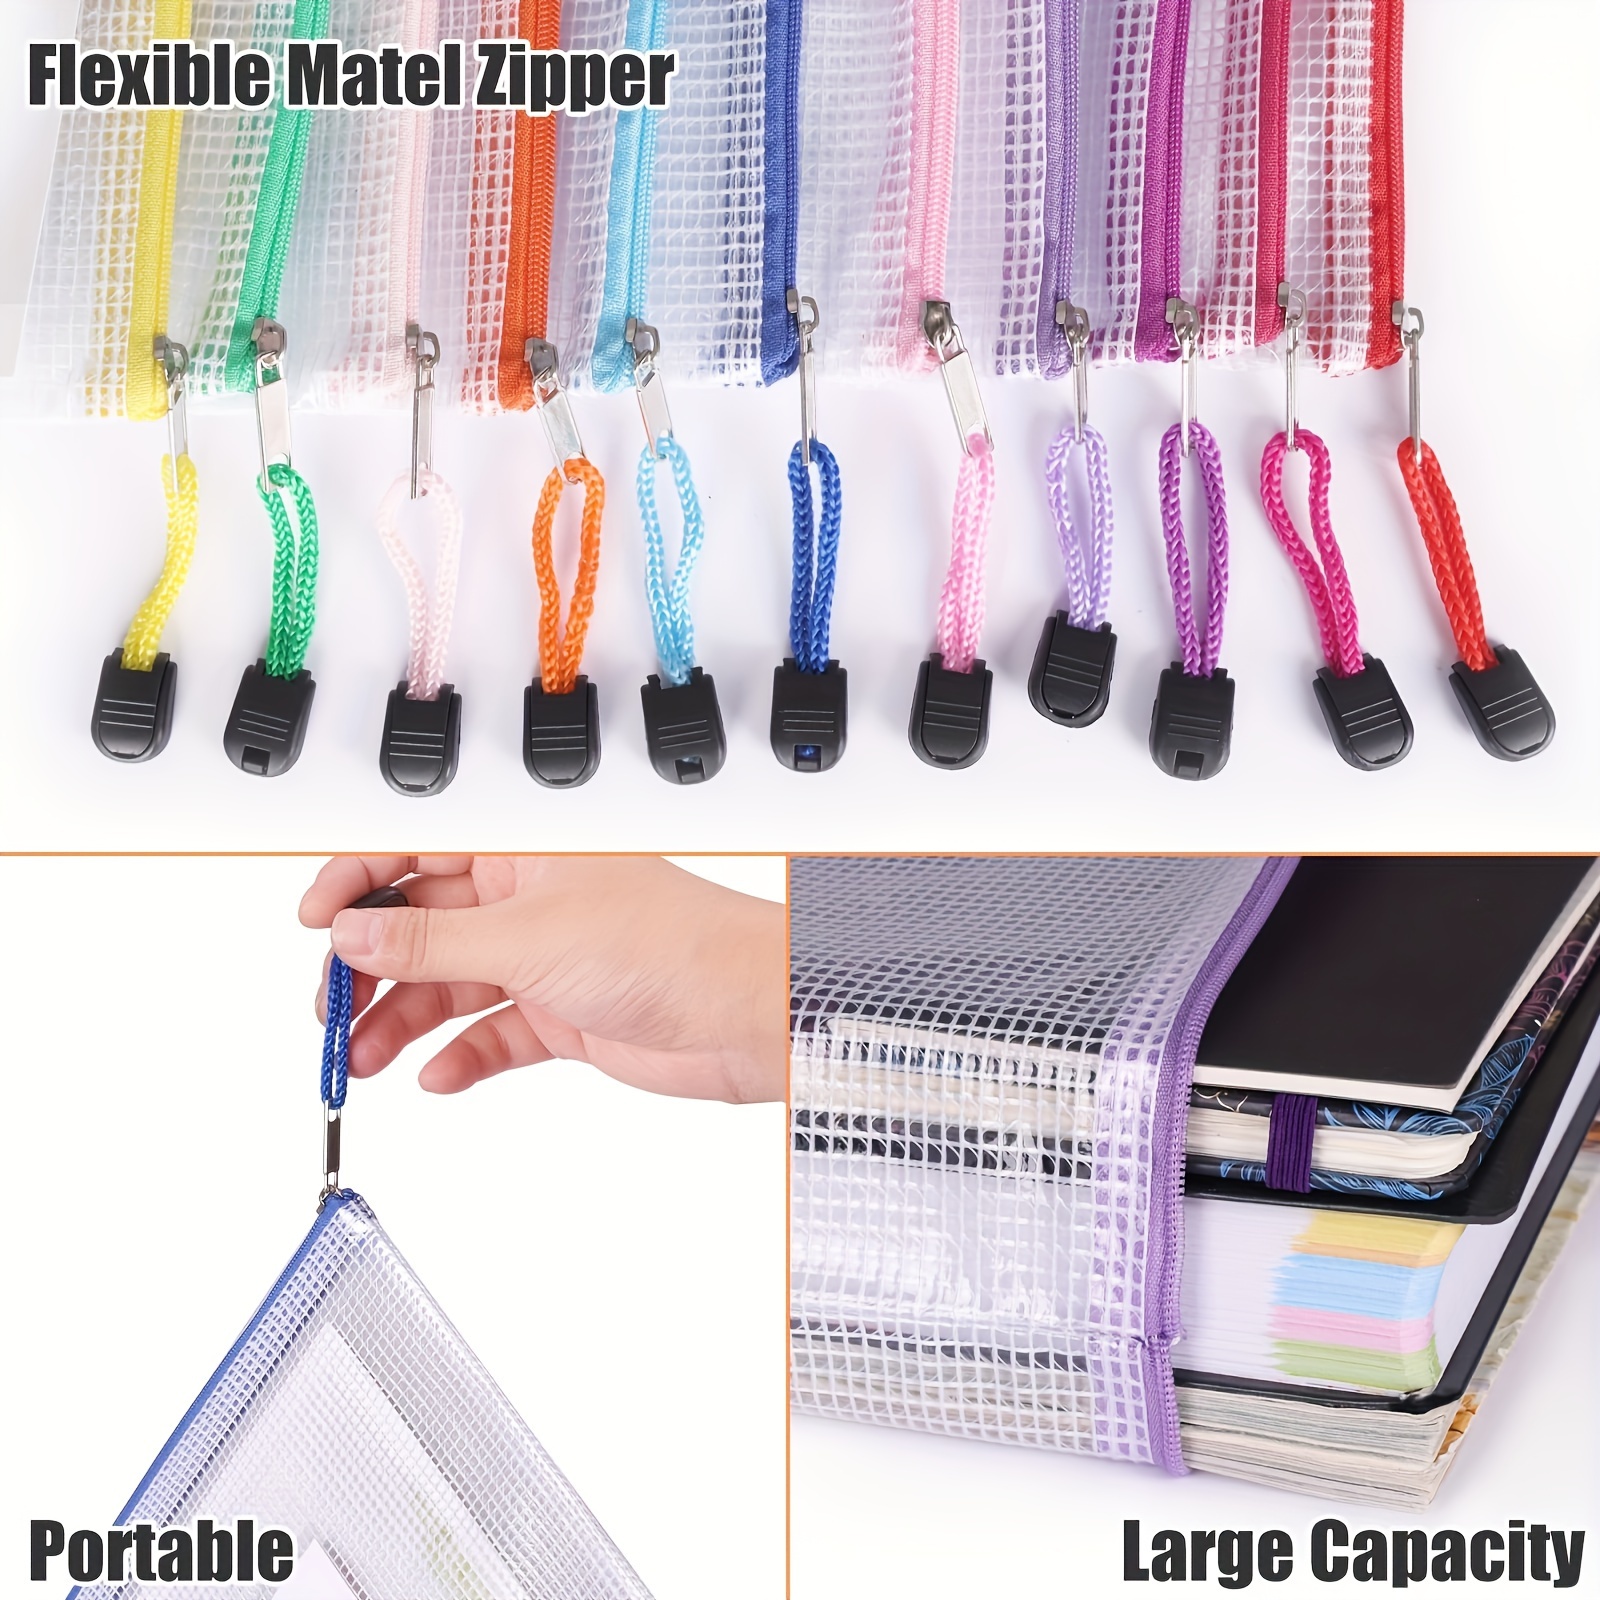  25pcs 8 Sizes, Mesh Zipper Pouch, 11 Colors, Waterproof Zip  File Document Folders, Travel Accessories, For Office School Supplies Board  Game Organizers And Storage